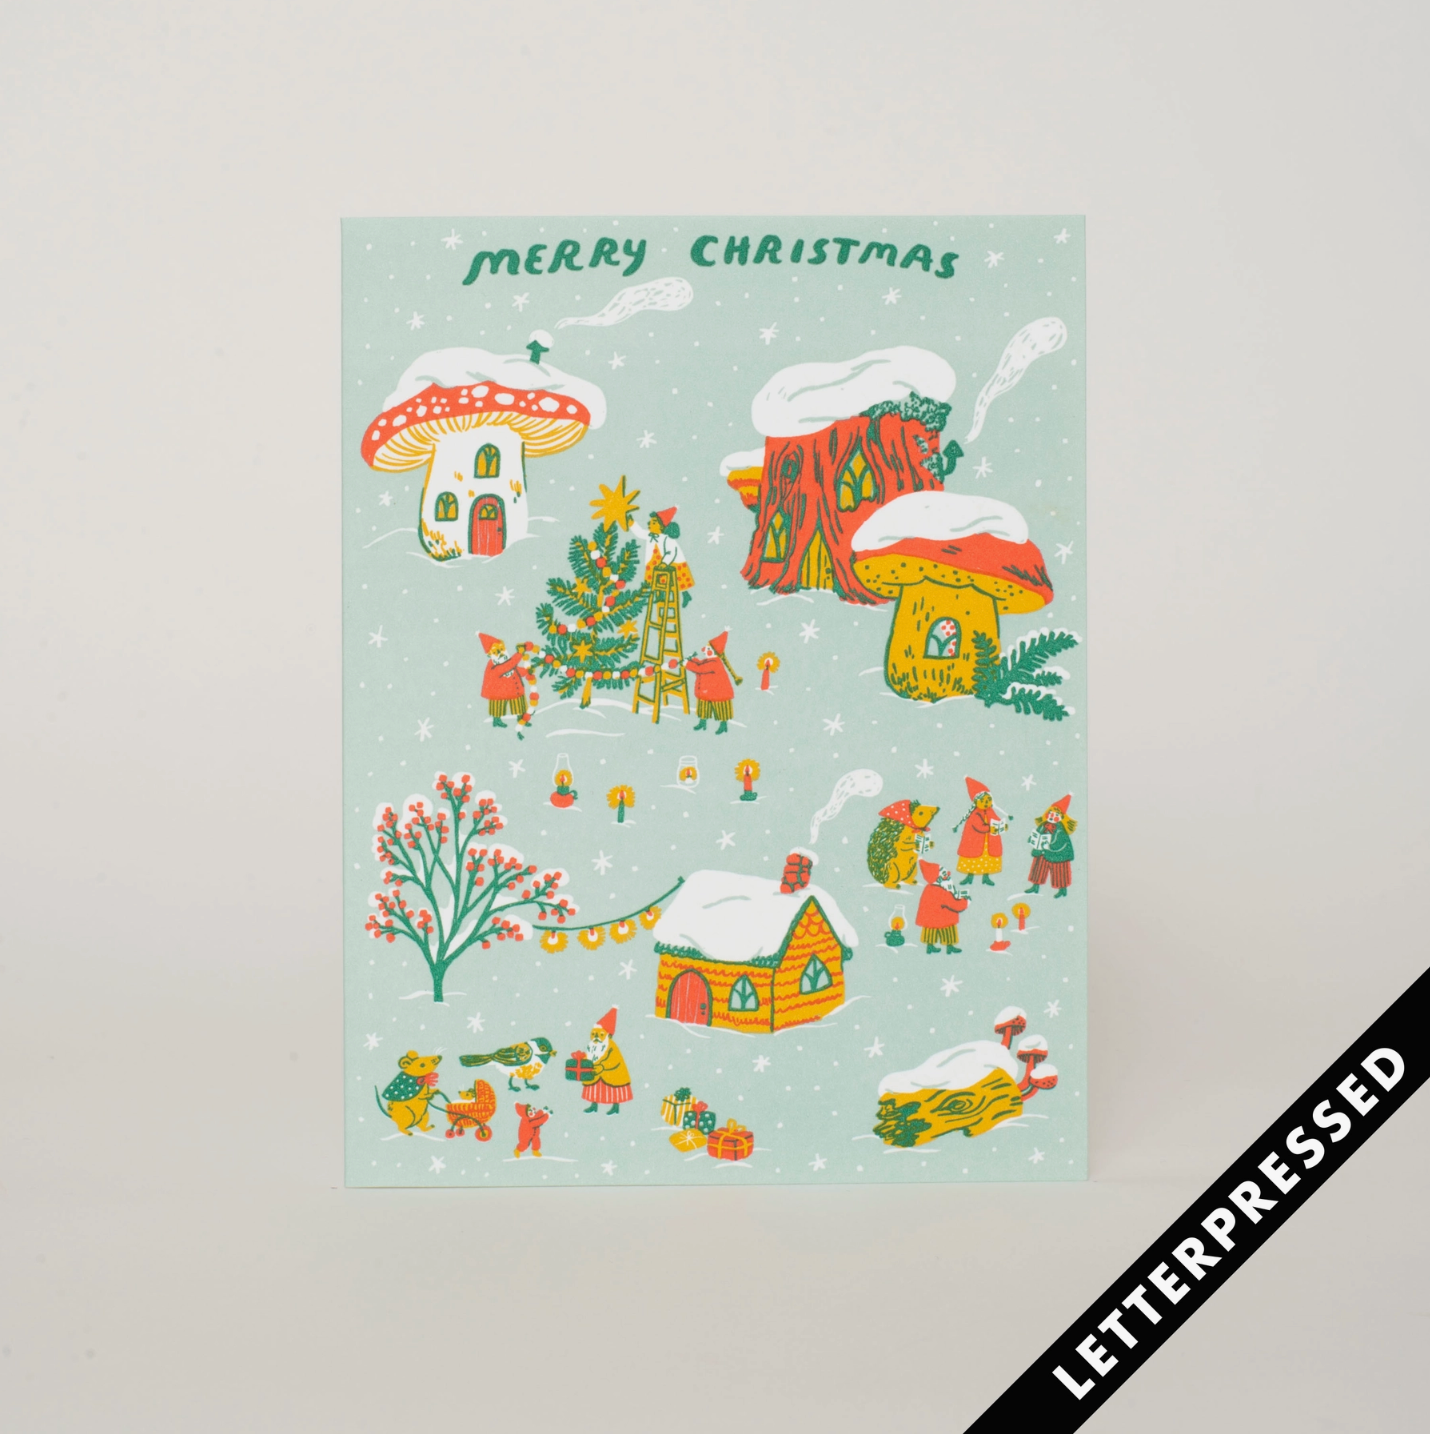 Merry Christmas Village -Phoebe Wahl -holiday